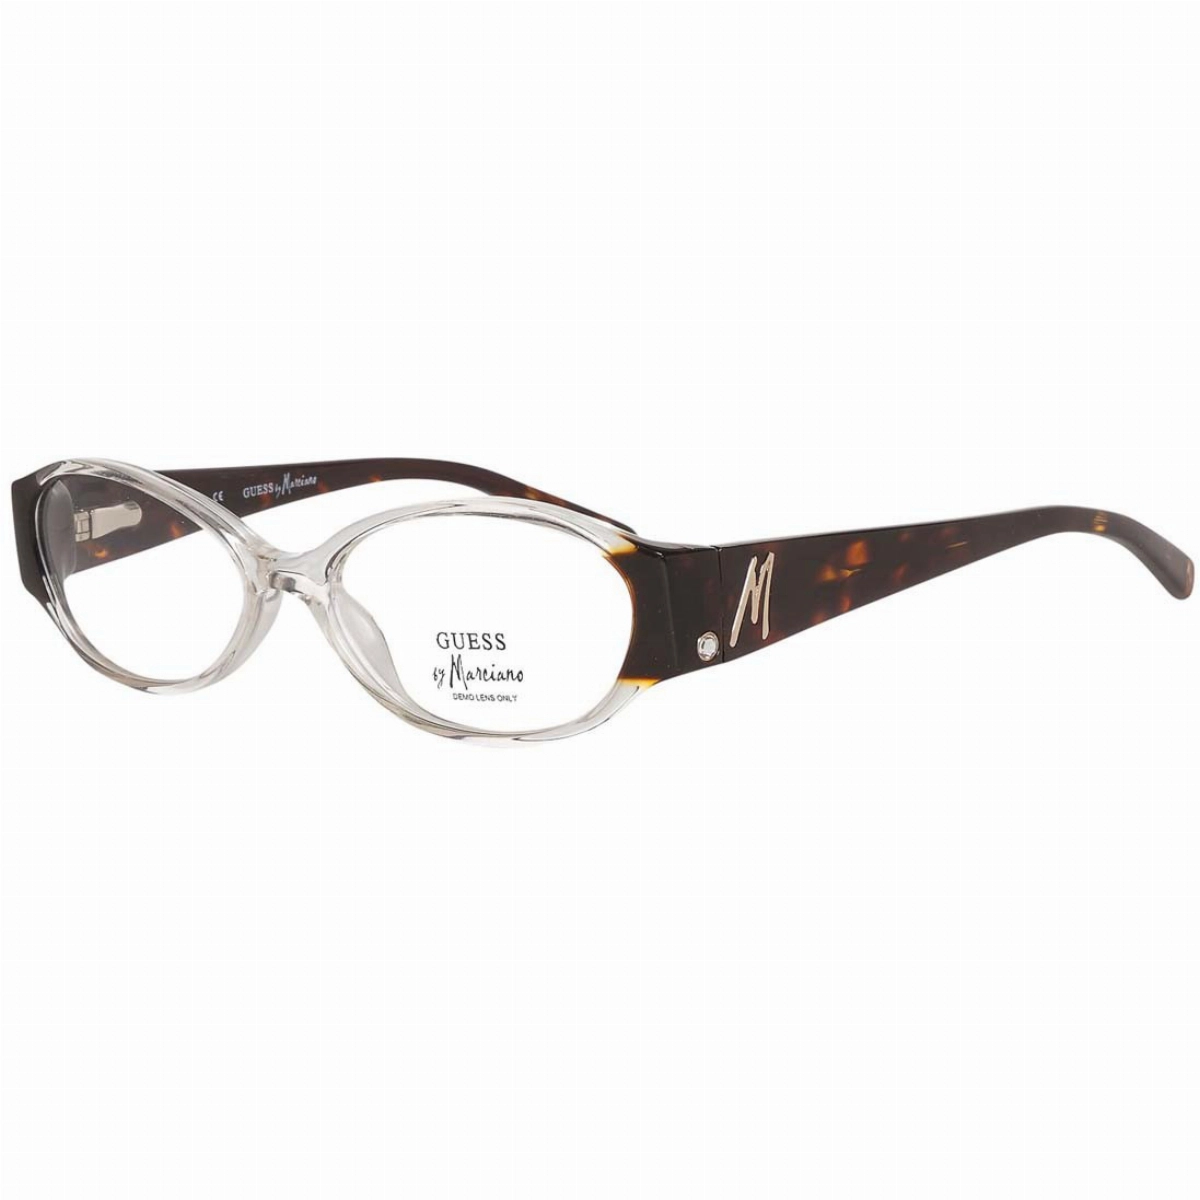 LUNETTES FEMMES GUESS MARCIANO GM130-52-CLRTO GM130-52CLRTO